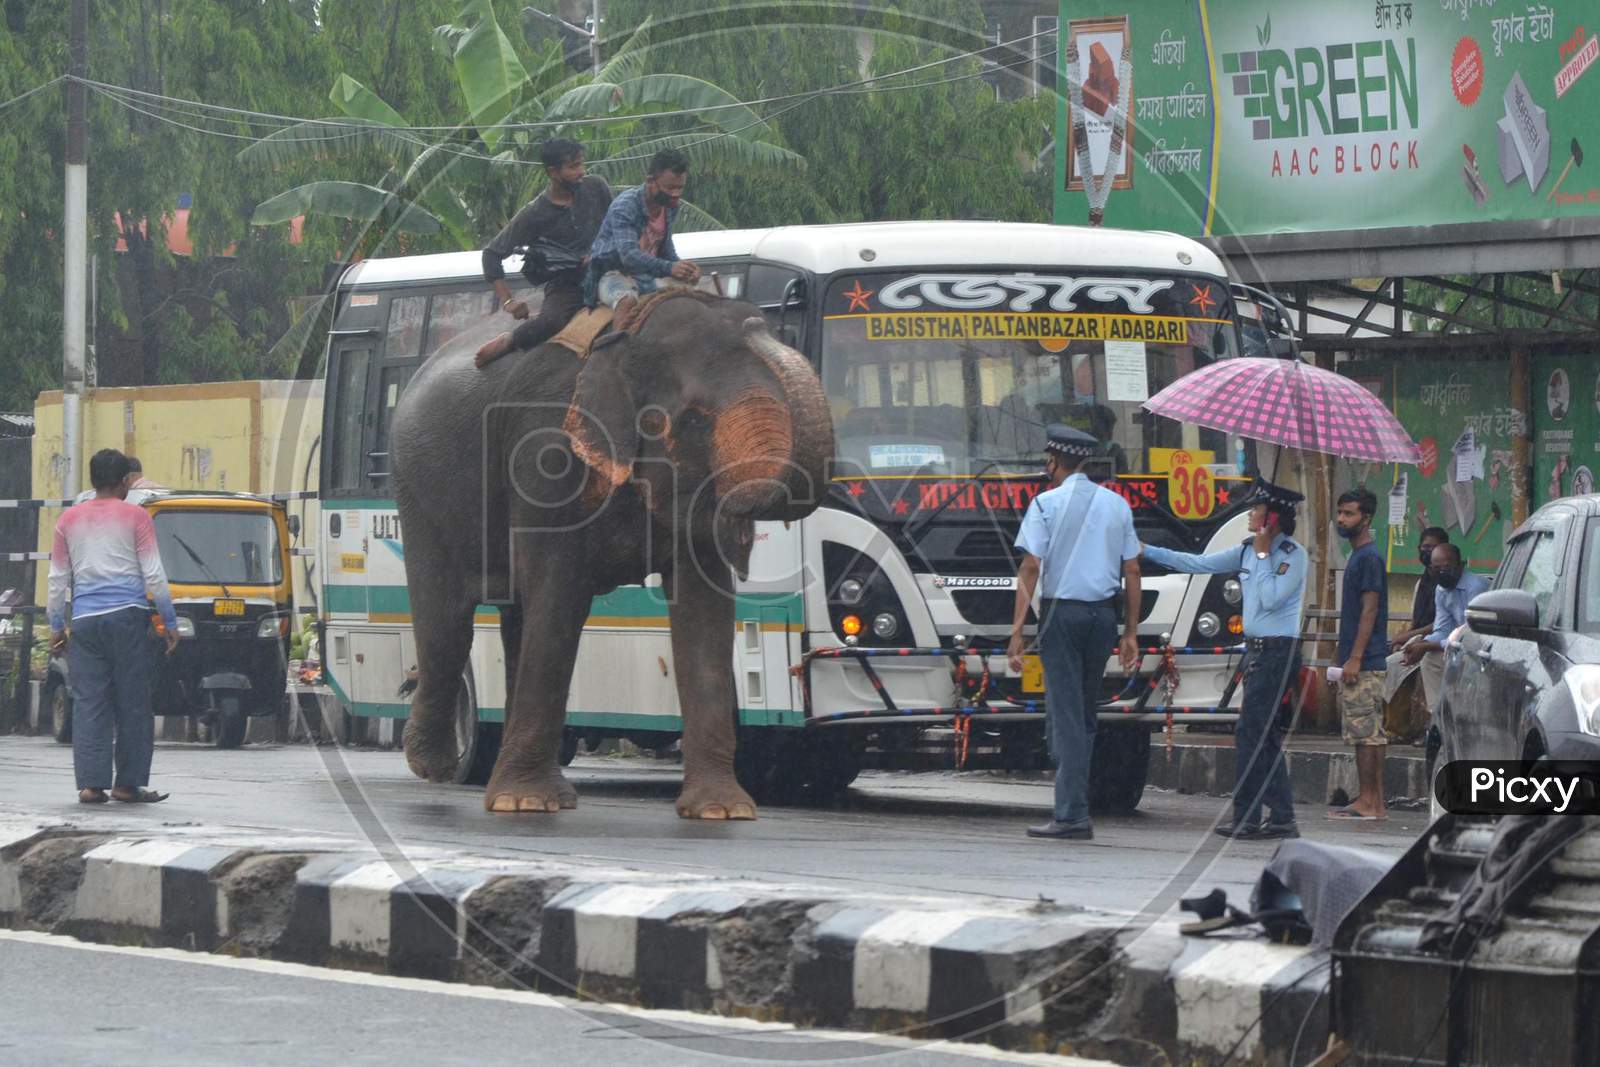 Traffic Police Feeds An Elephant While On Duty On A Rainy Day, During The Ongoing Covid-19 Nationwide Lockdown, In Guwahati On Saturday, June 13, 2020.